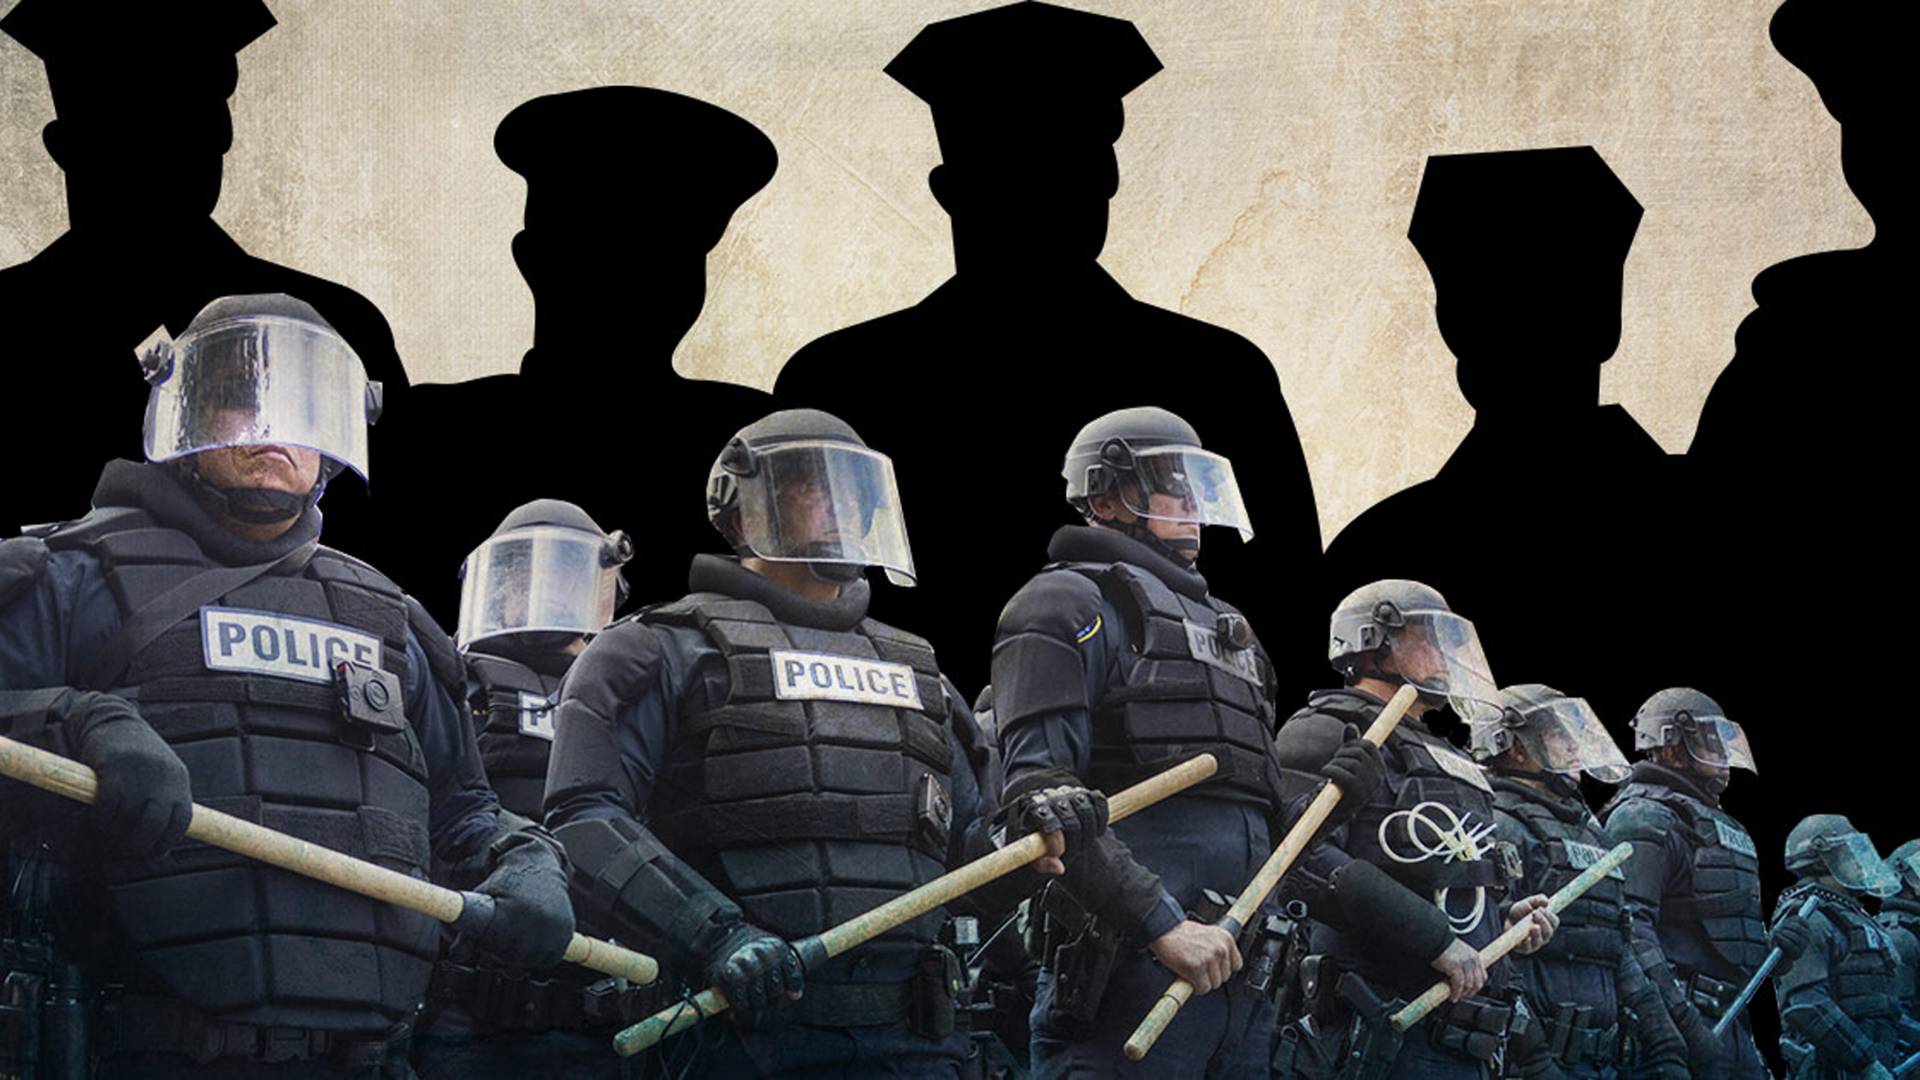 Riot police stand in front of silhouettes in police uniform